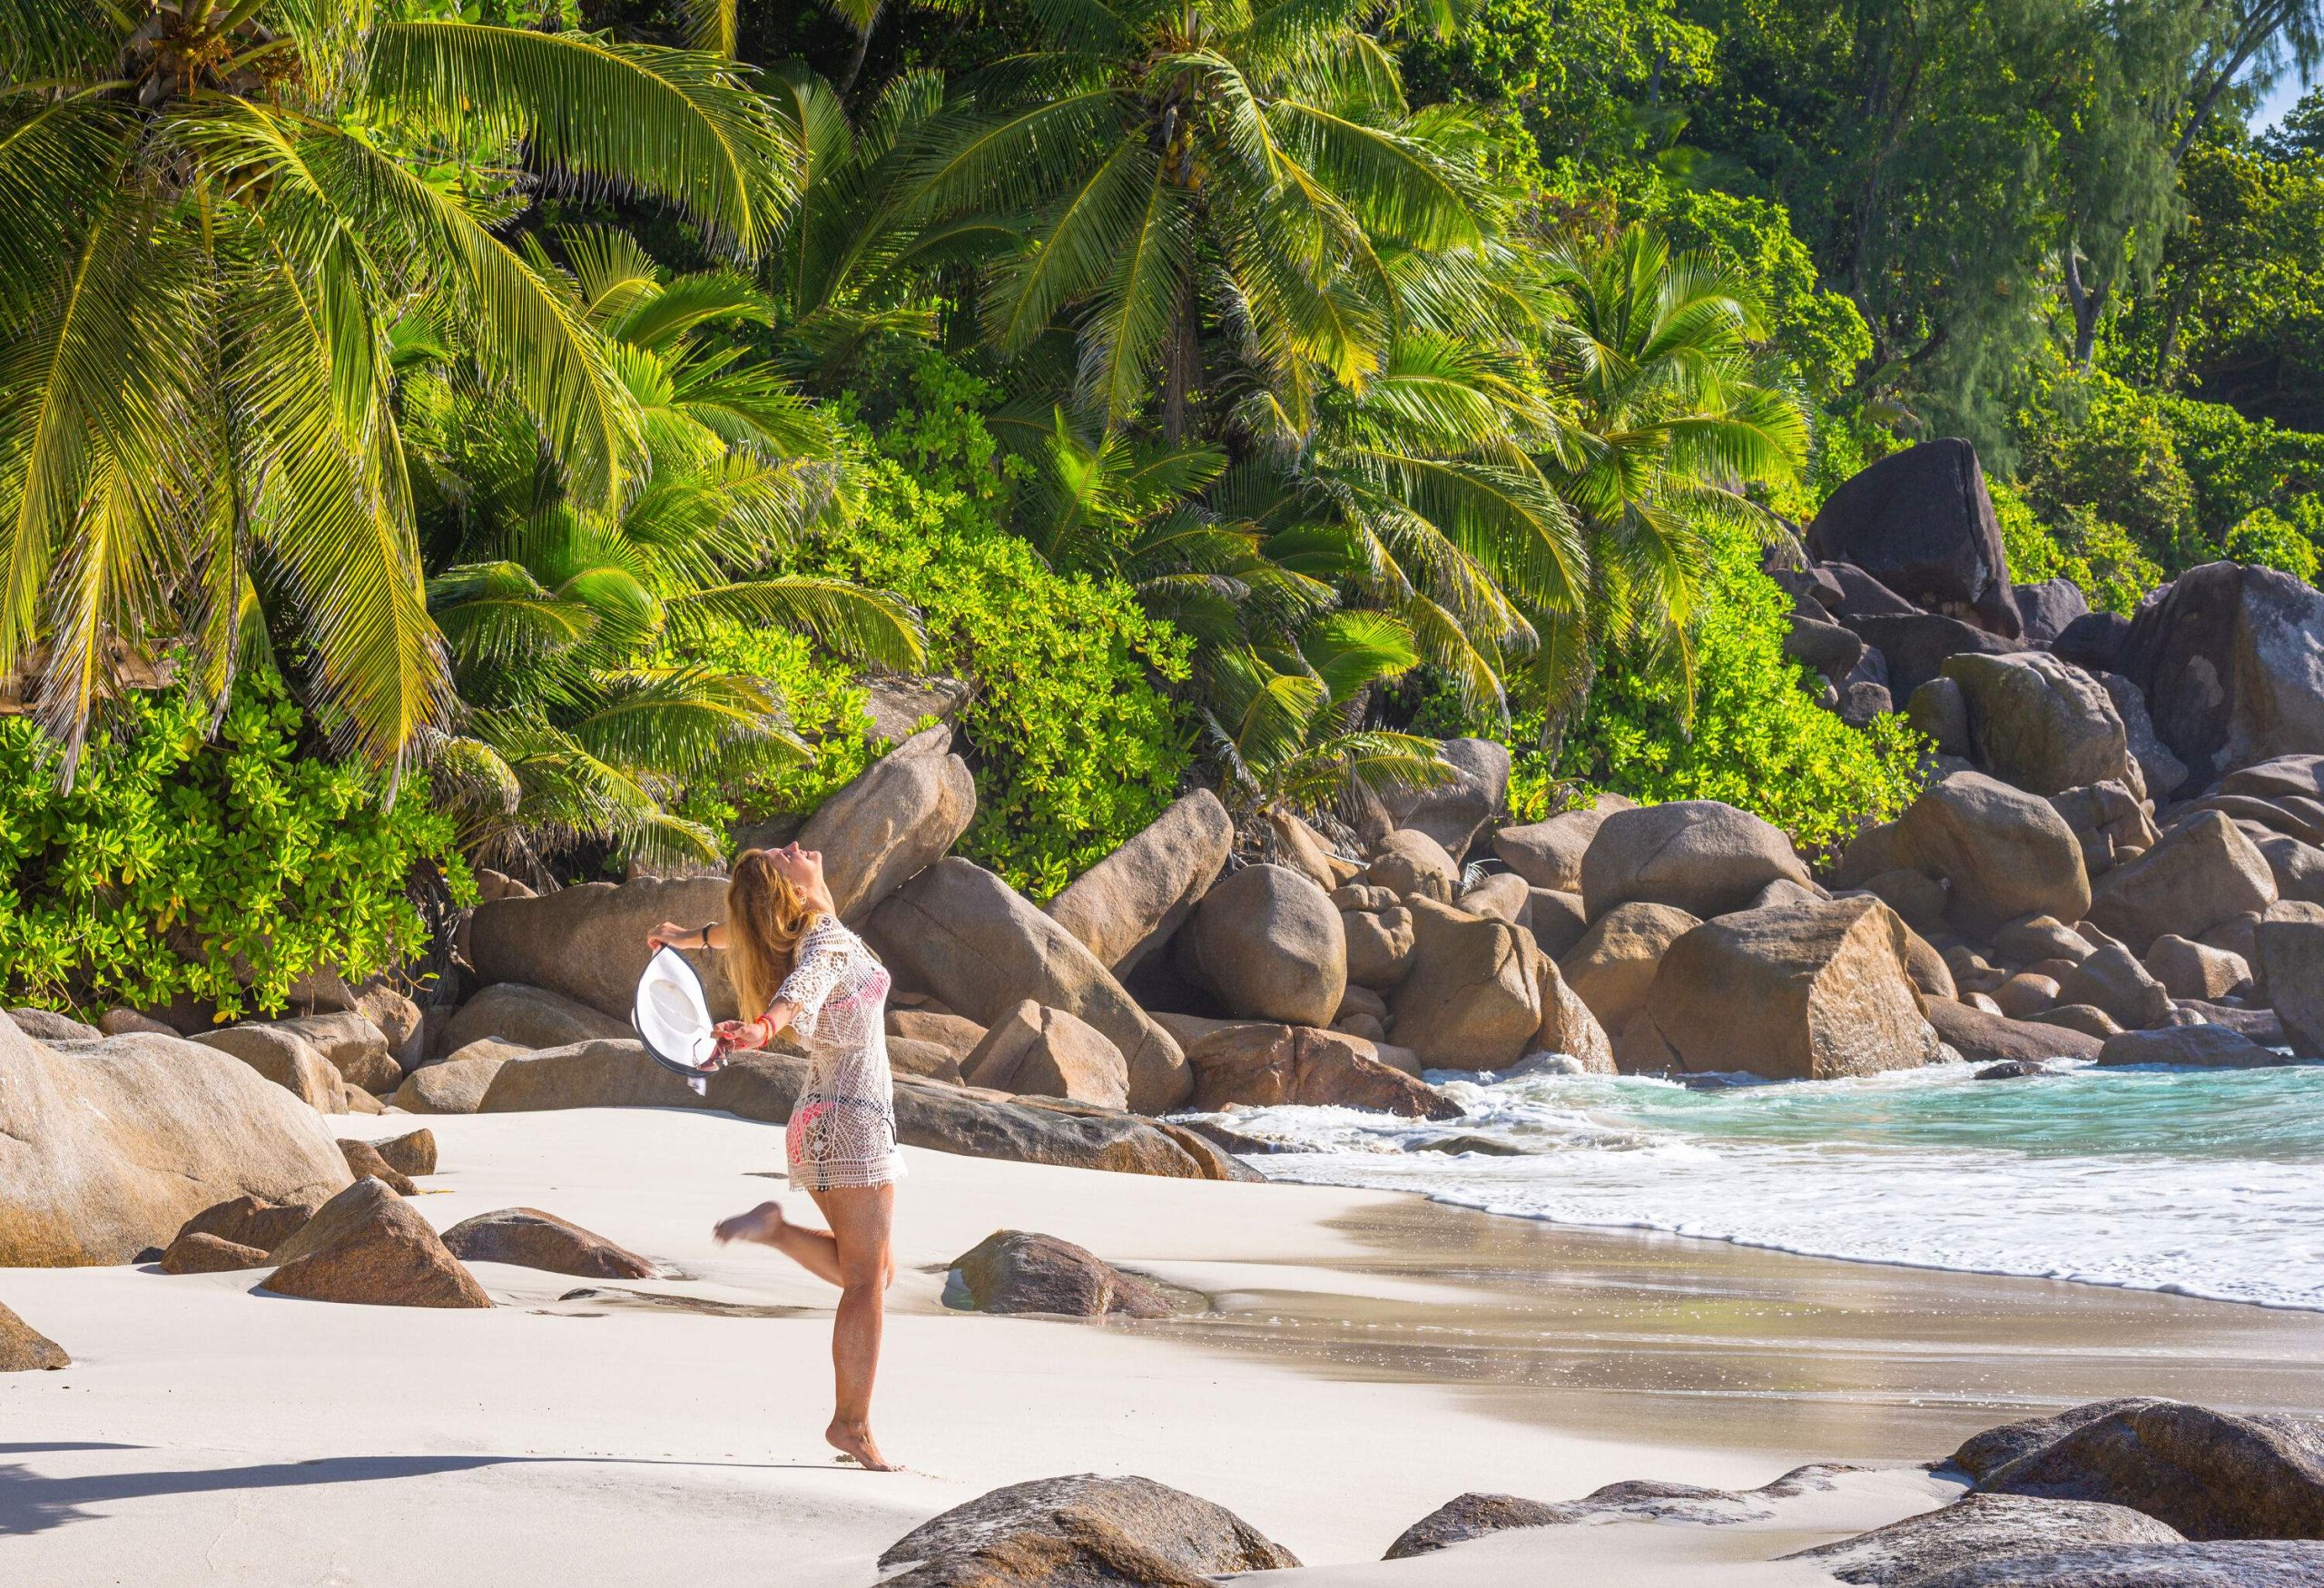 A cheerful woman spreads her arms as she stands on a beach with big boulders and lush tropical foliage.